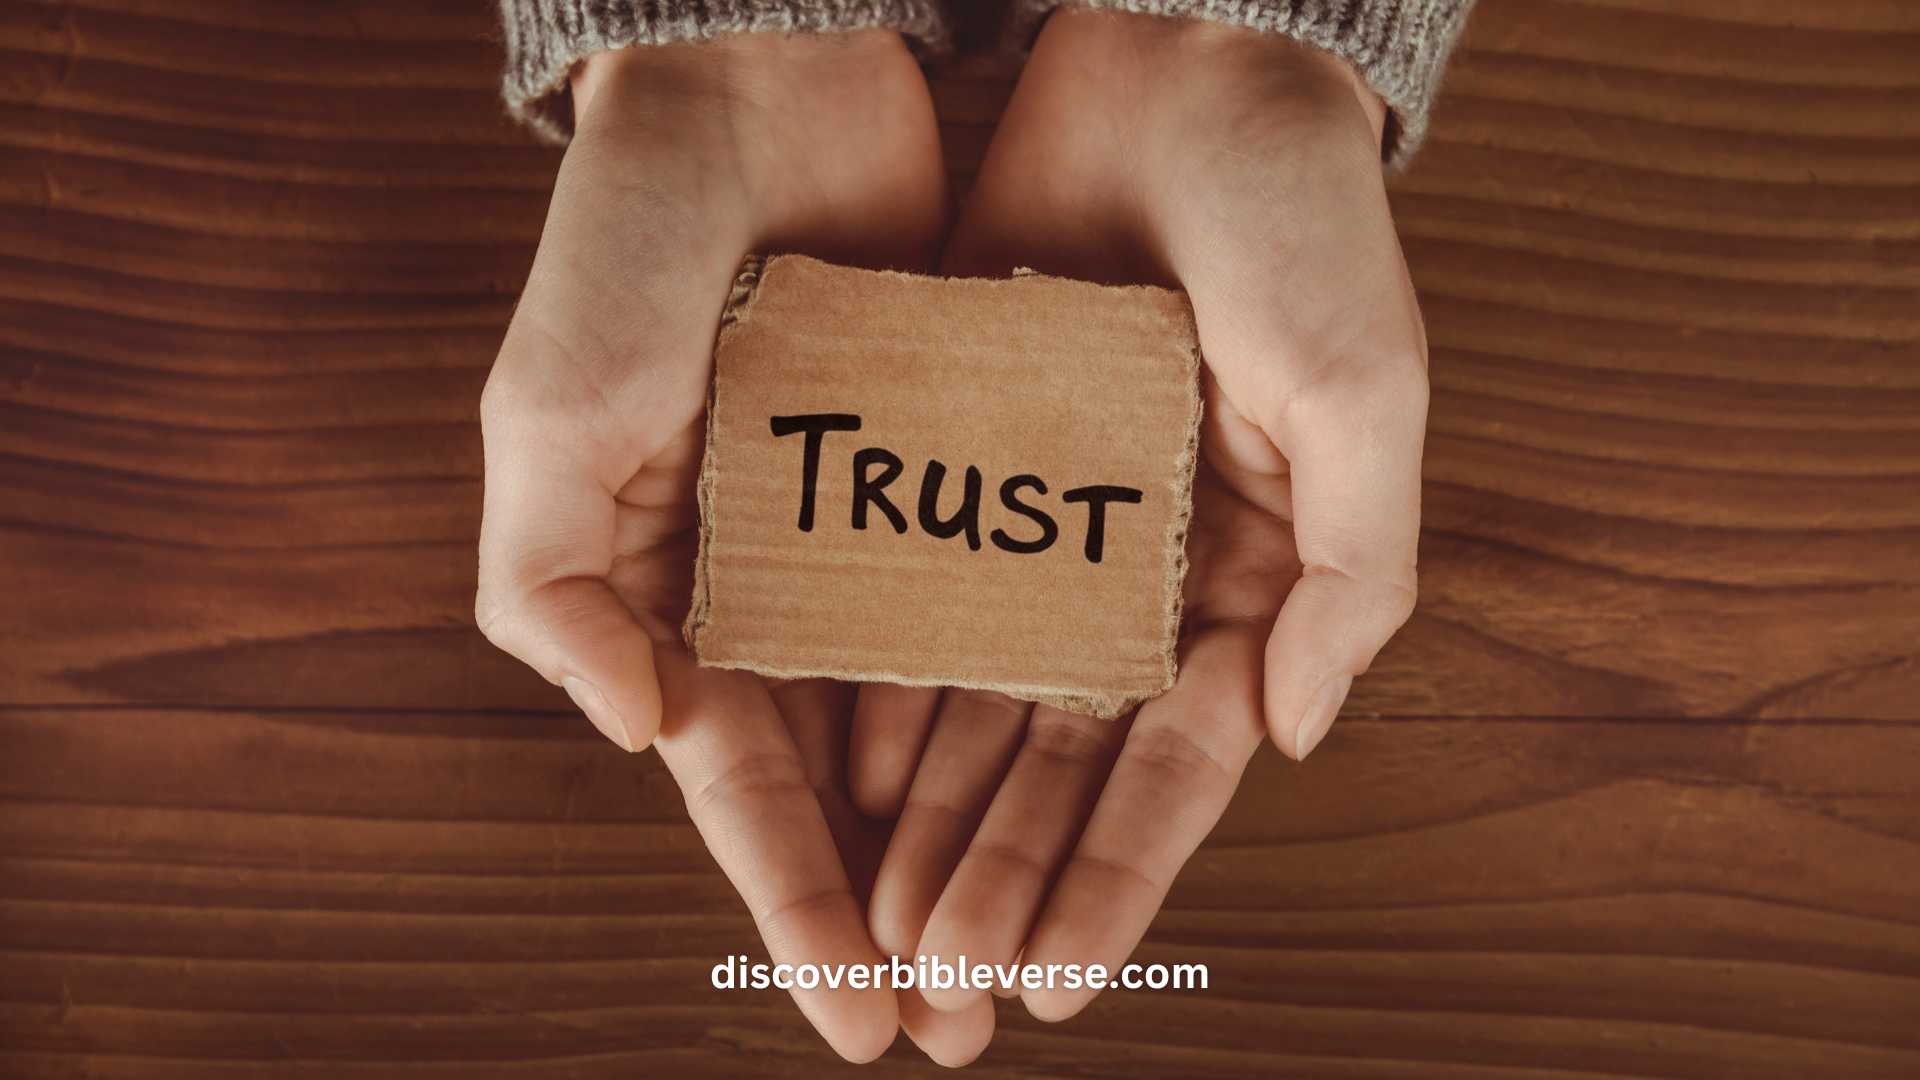 Why Should We Not Place Our Trust in Man According to the Bible?